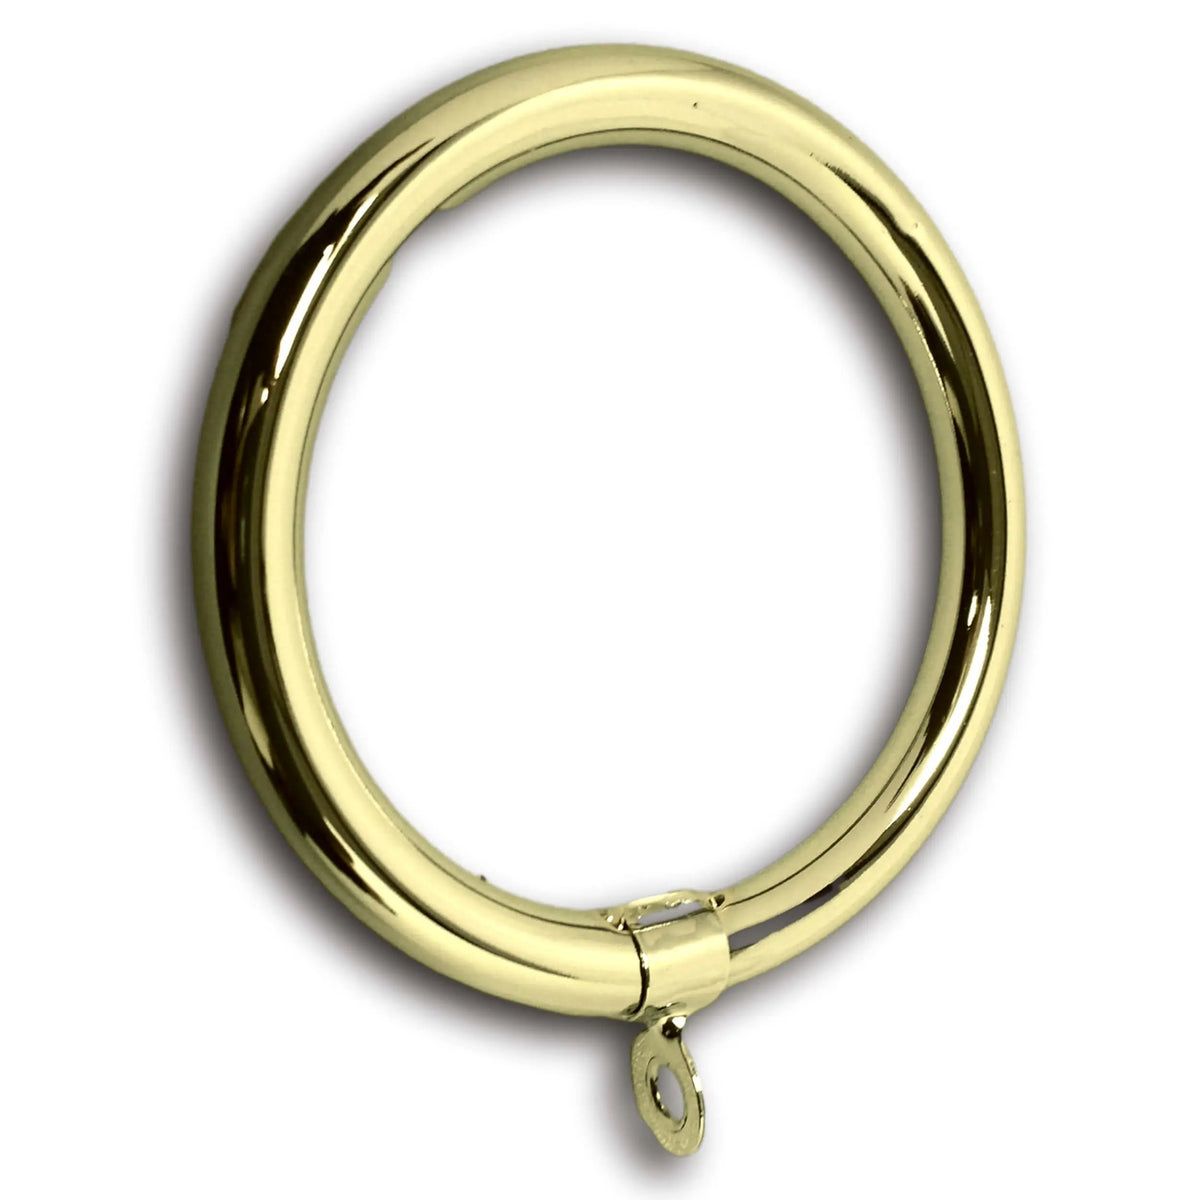 Curtain Ring for 1-1/2" Tubing Components for 1-1/2" Od Tubing, Drapery Hardware PowderCoatedFinish-PleaseCall Trade Diversified